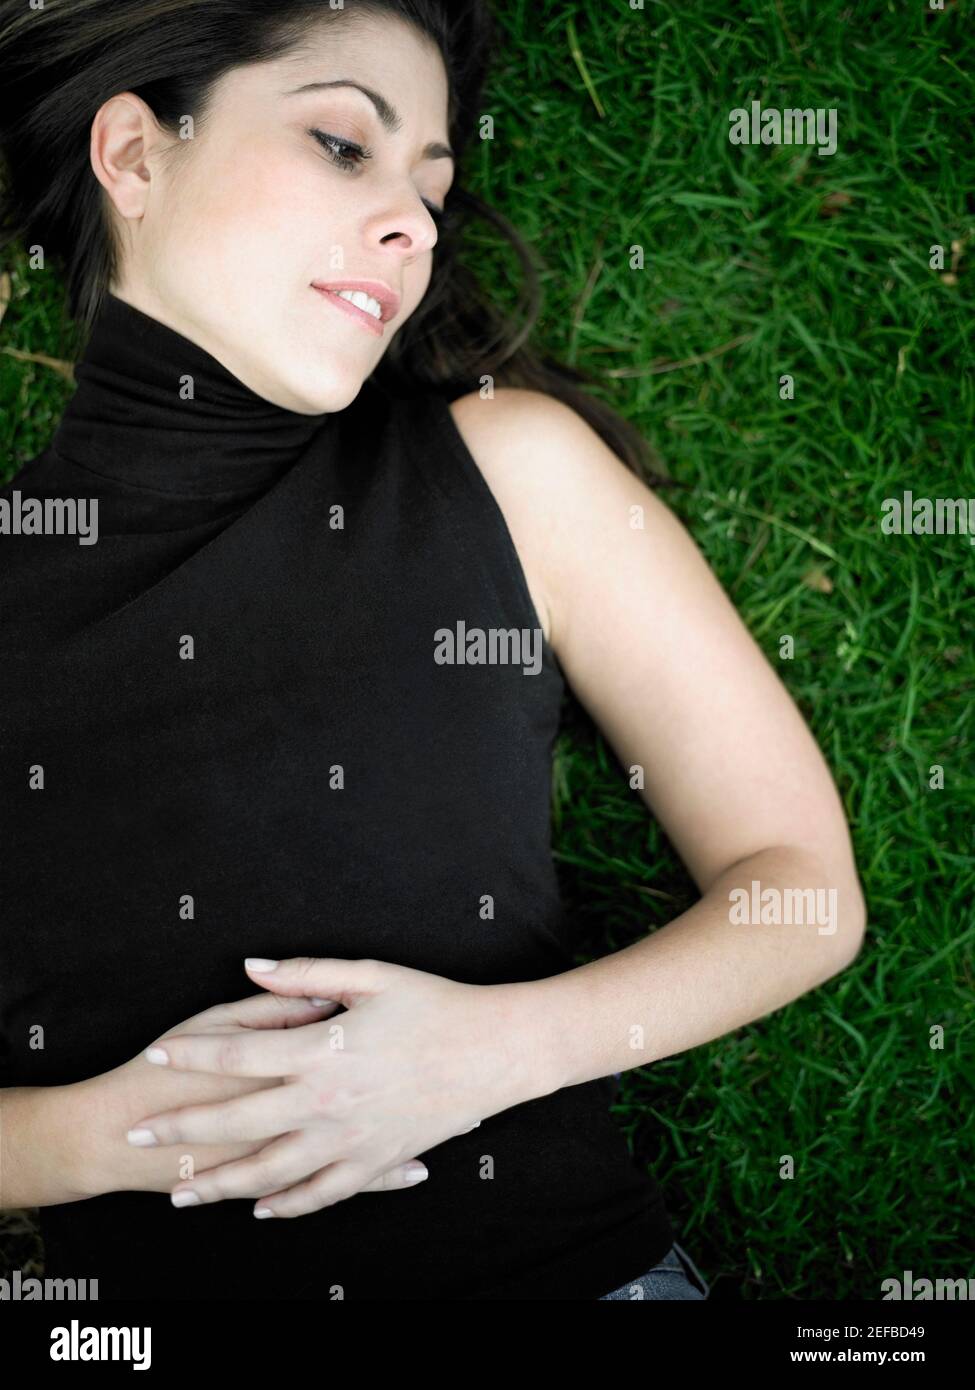 High angle view of a mid adult woman lying on a lawn Stock Photo